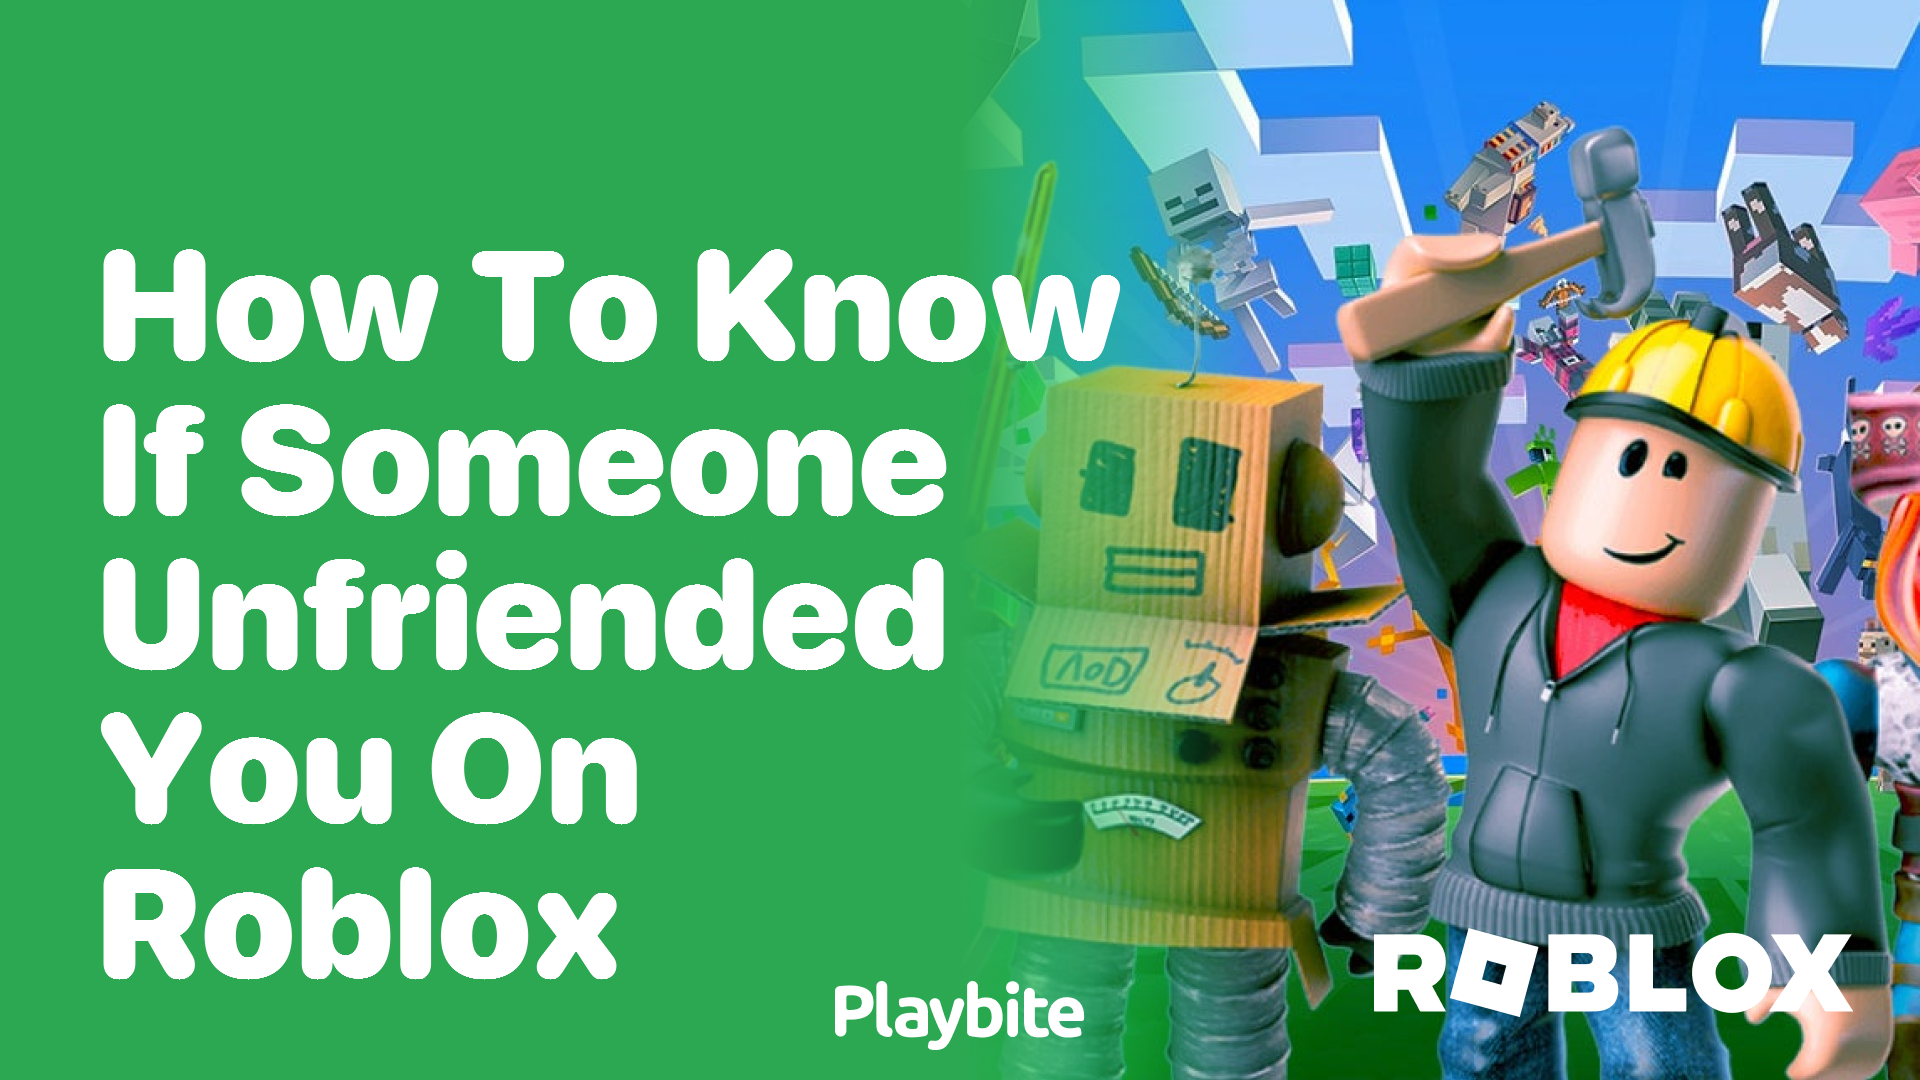 How to Know if Someone Unfriended You on Roblox